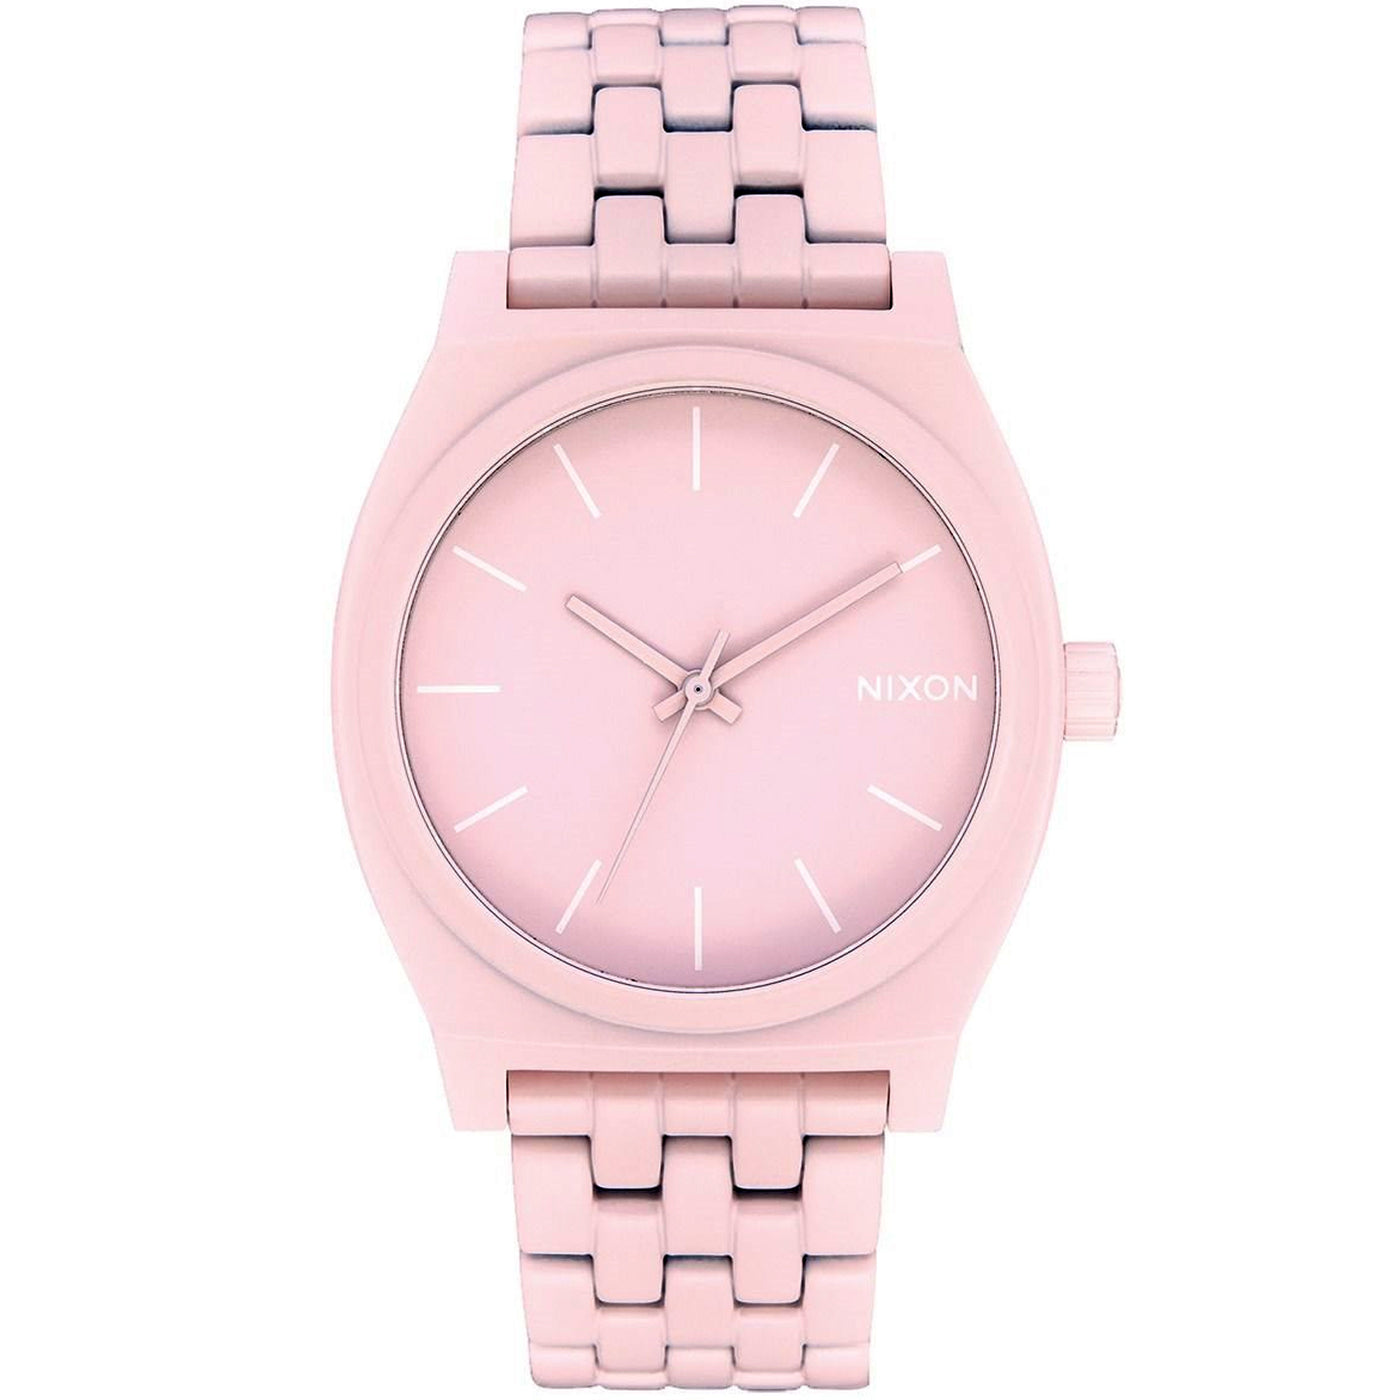 Nixon Men's Time Teller Pink Dial Watch - A045-3164 — Accuratime